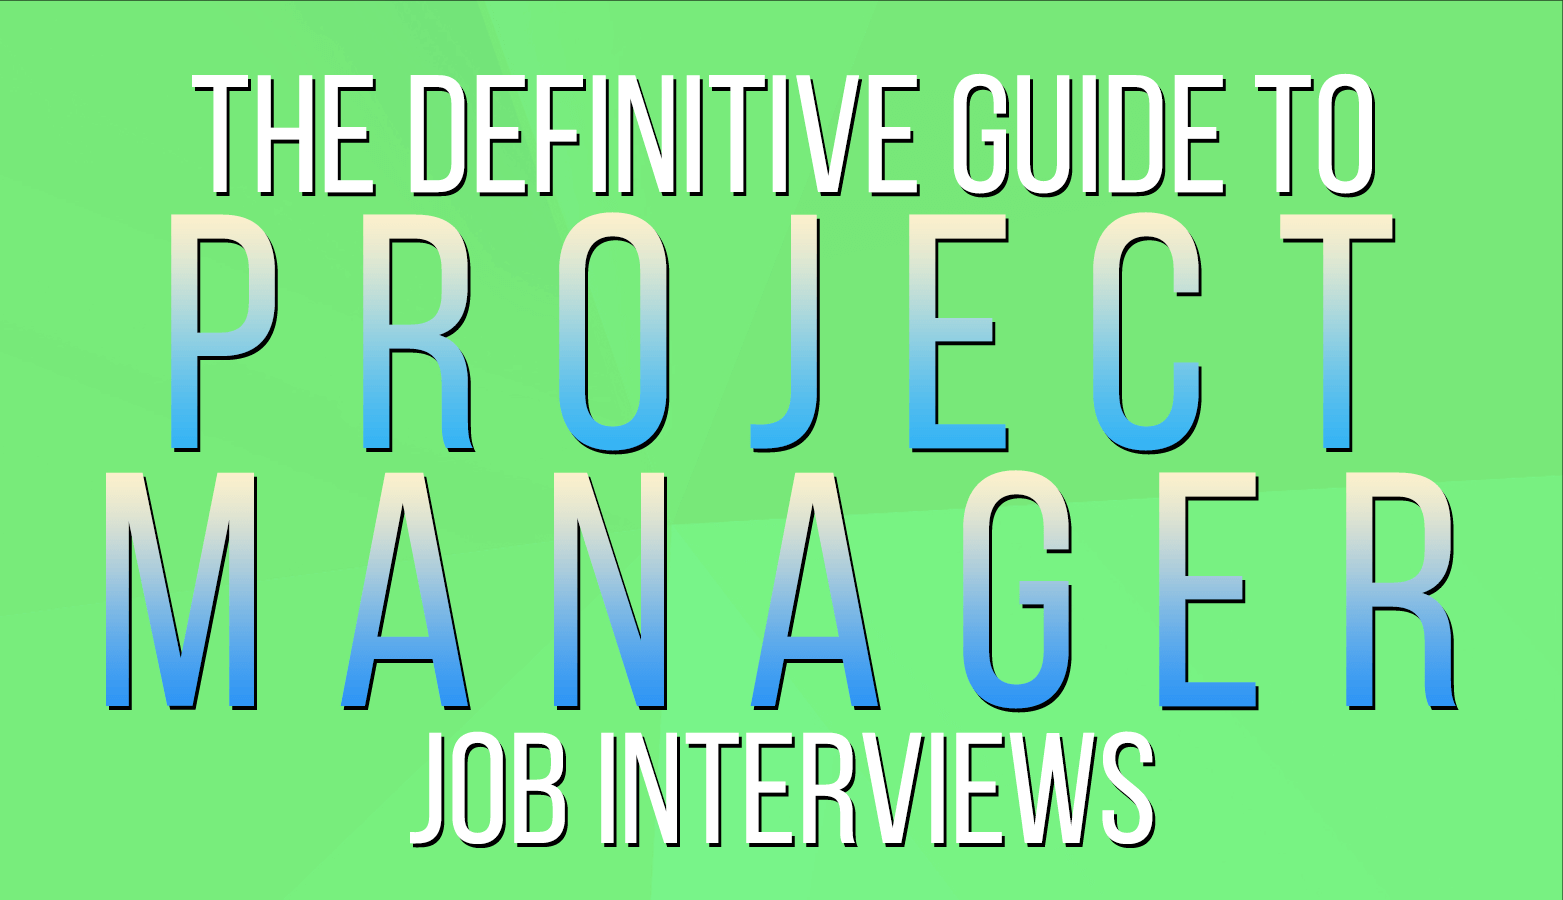 16240Product Manager Interview Guide, With The Most Recent Questions and Answers – 2022